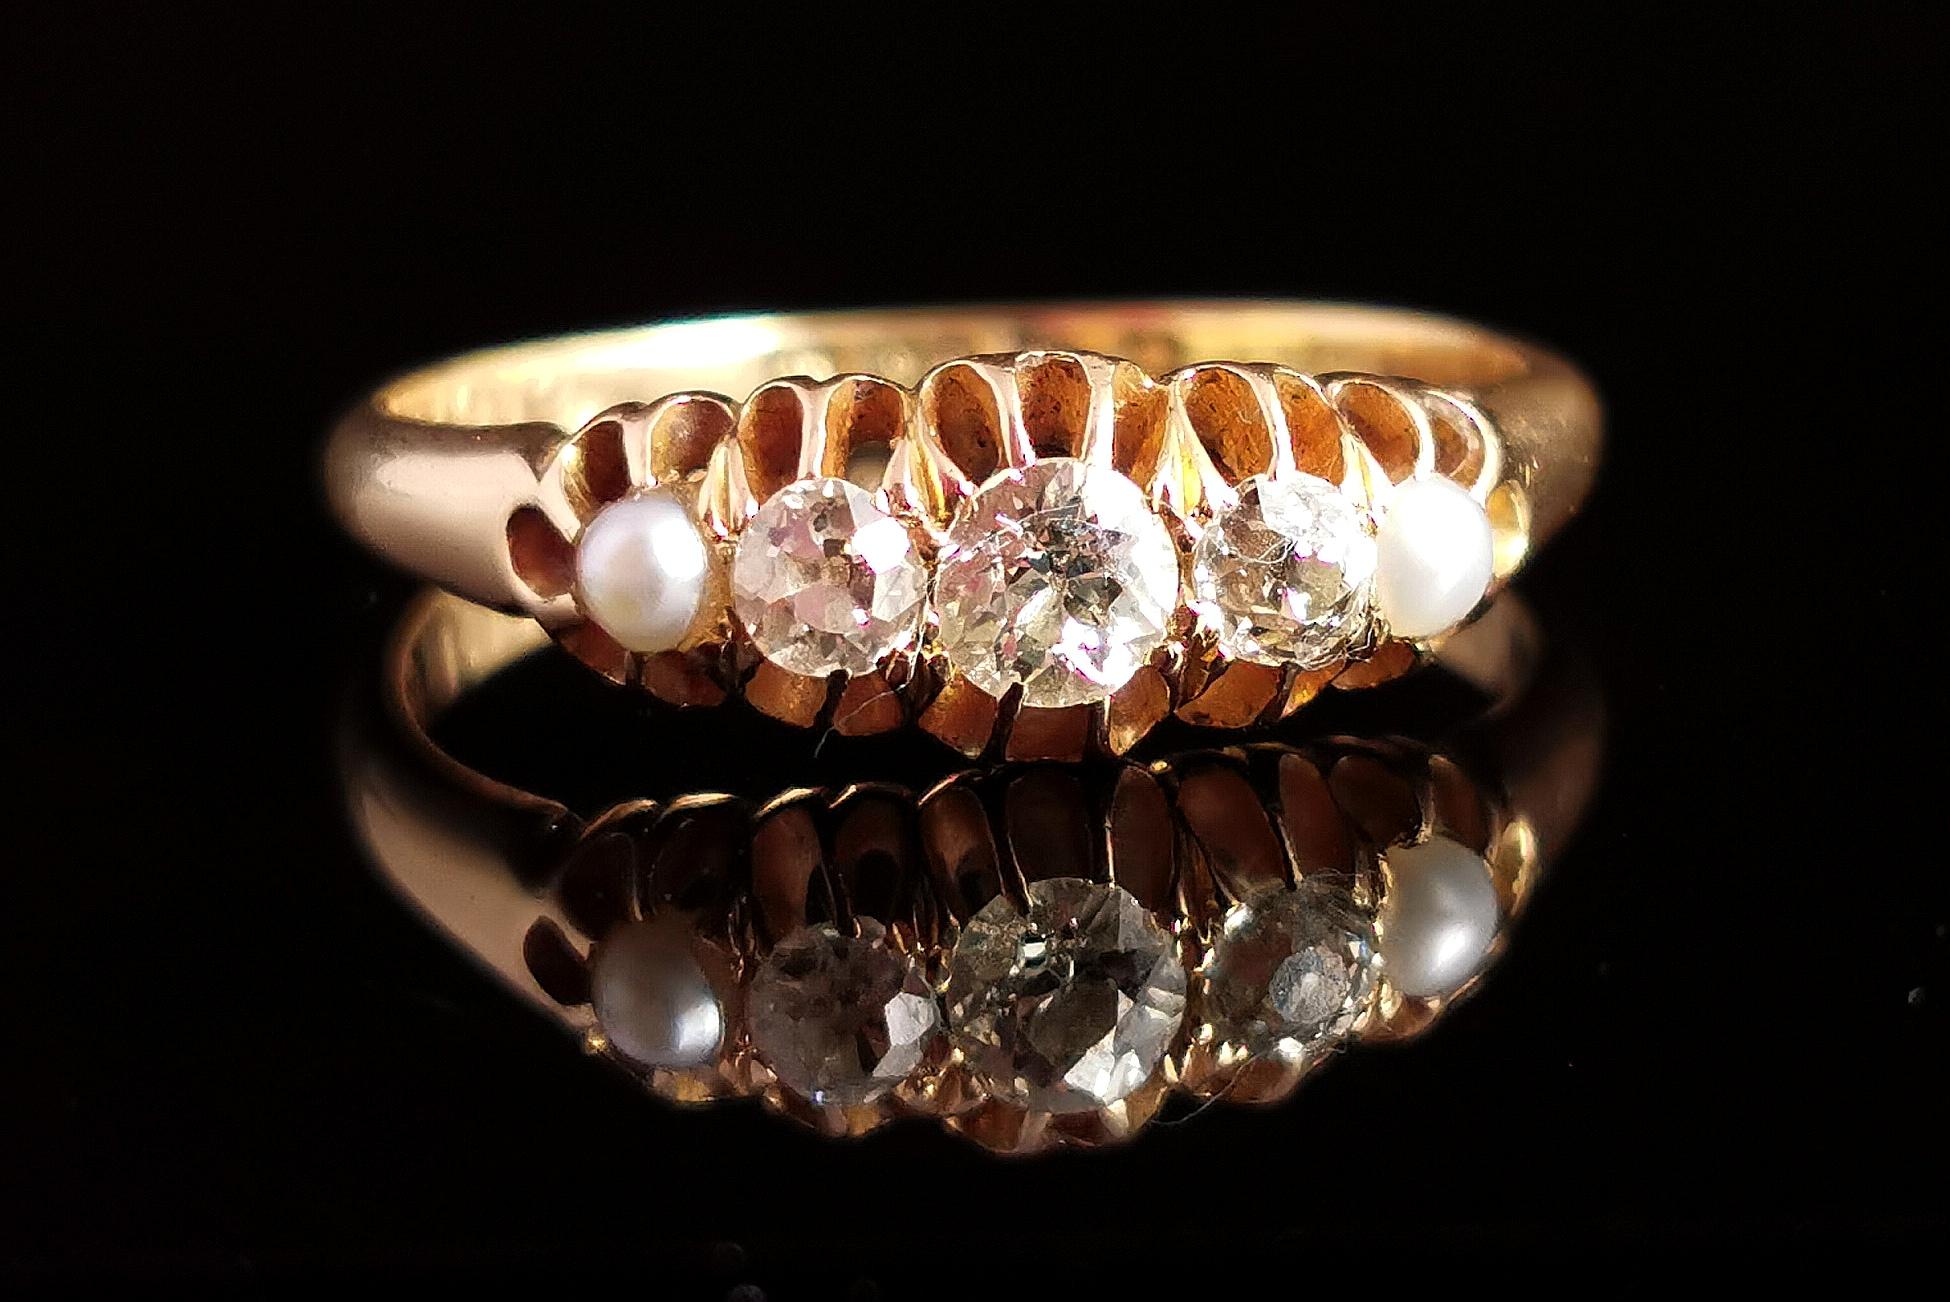 A stunning fine antique, Edwardian old cut diamond and split pearl ring.

This beauty is a boat head style ring in rich buttery 18kt gold, the face is claw set with three sparkling old cut diamonds, the largest to the centre with an estimated 0.25ct